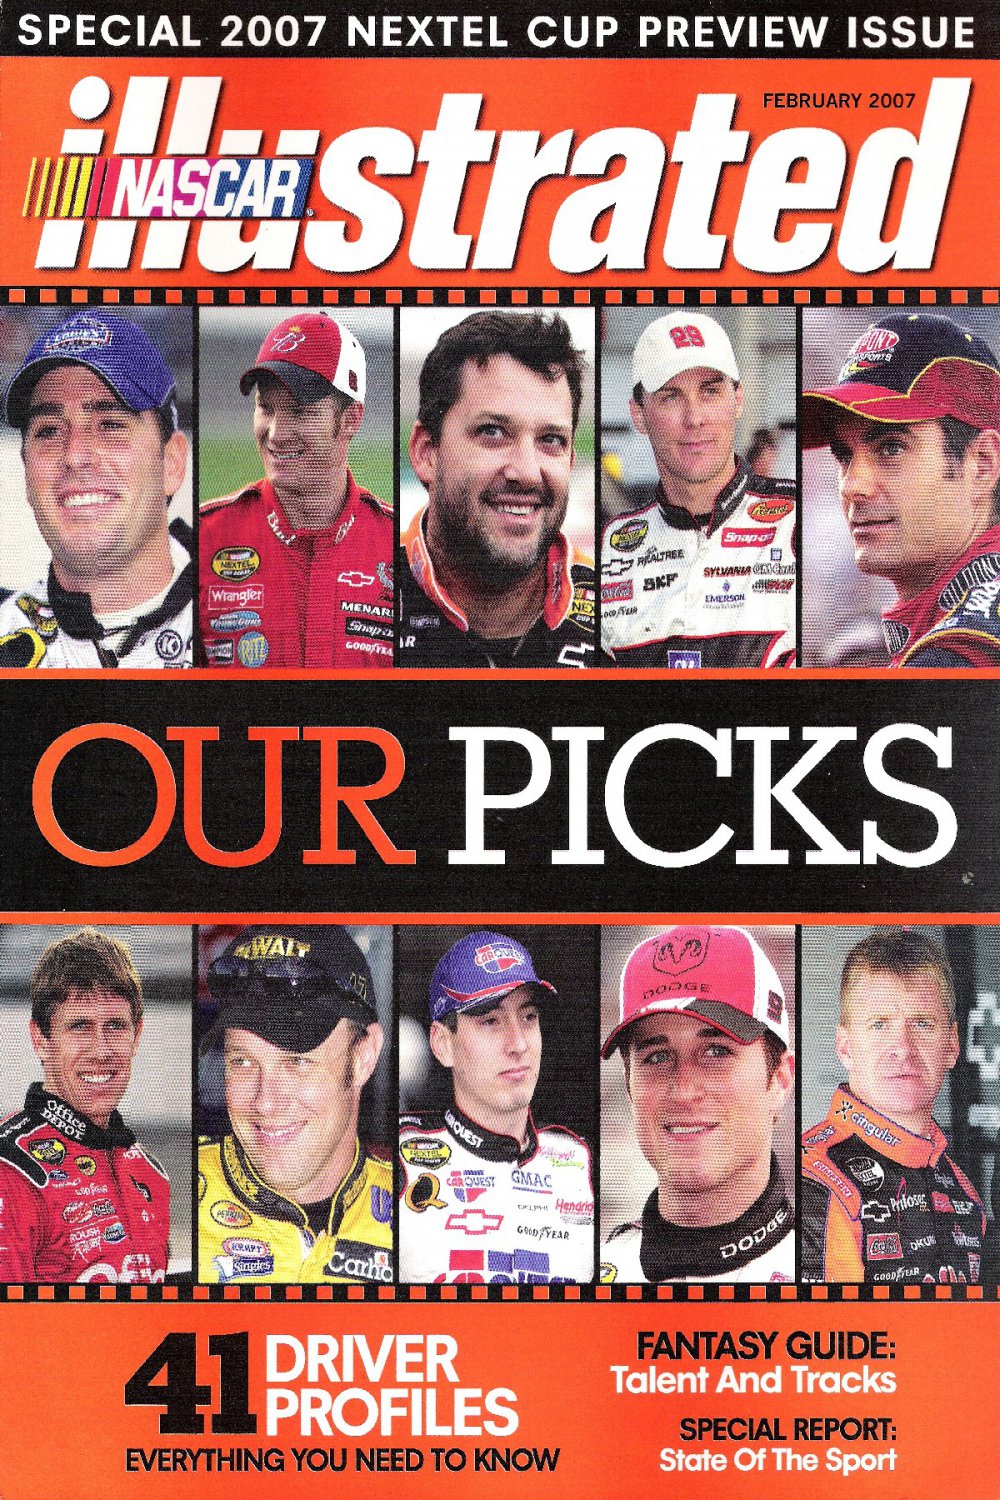 Nascar Illustrated February 2007 Special Nextel Cup Preview Issue